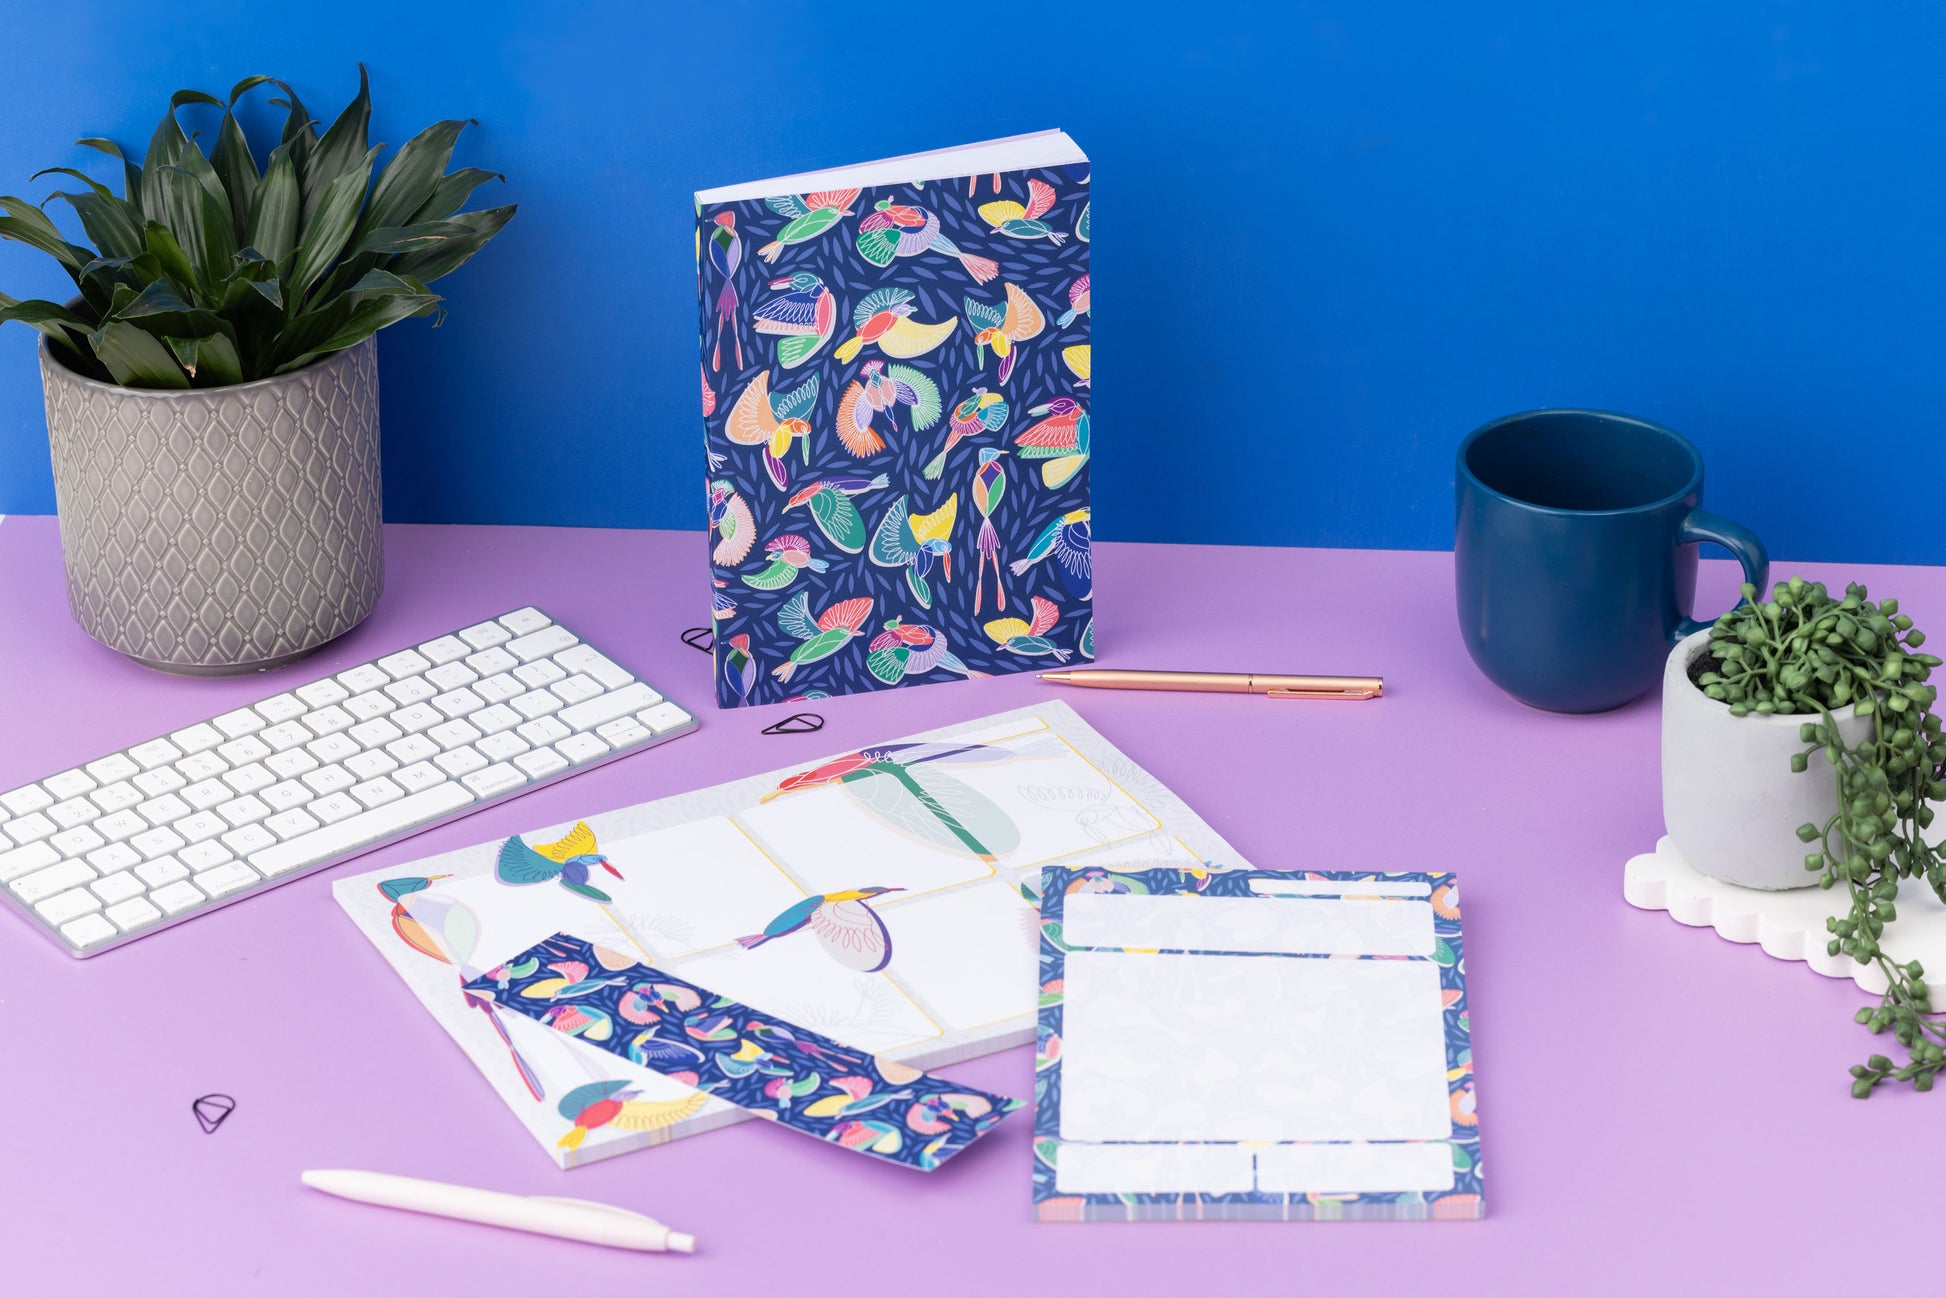 Paradise Full collection - A4 Planner Pad, A5 Daily Planner Pad, Double-sided bookmark and A5 Dot Grid Notebook - are on a lilac desk with small plants, pens and a white keyboard around them.  The A5 Notebooks is upright.  There is a blue wall behind.